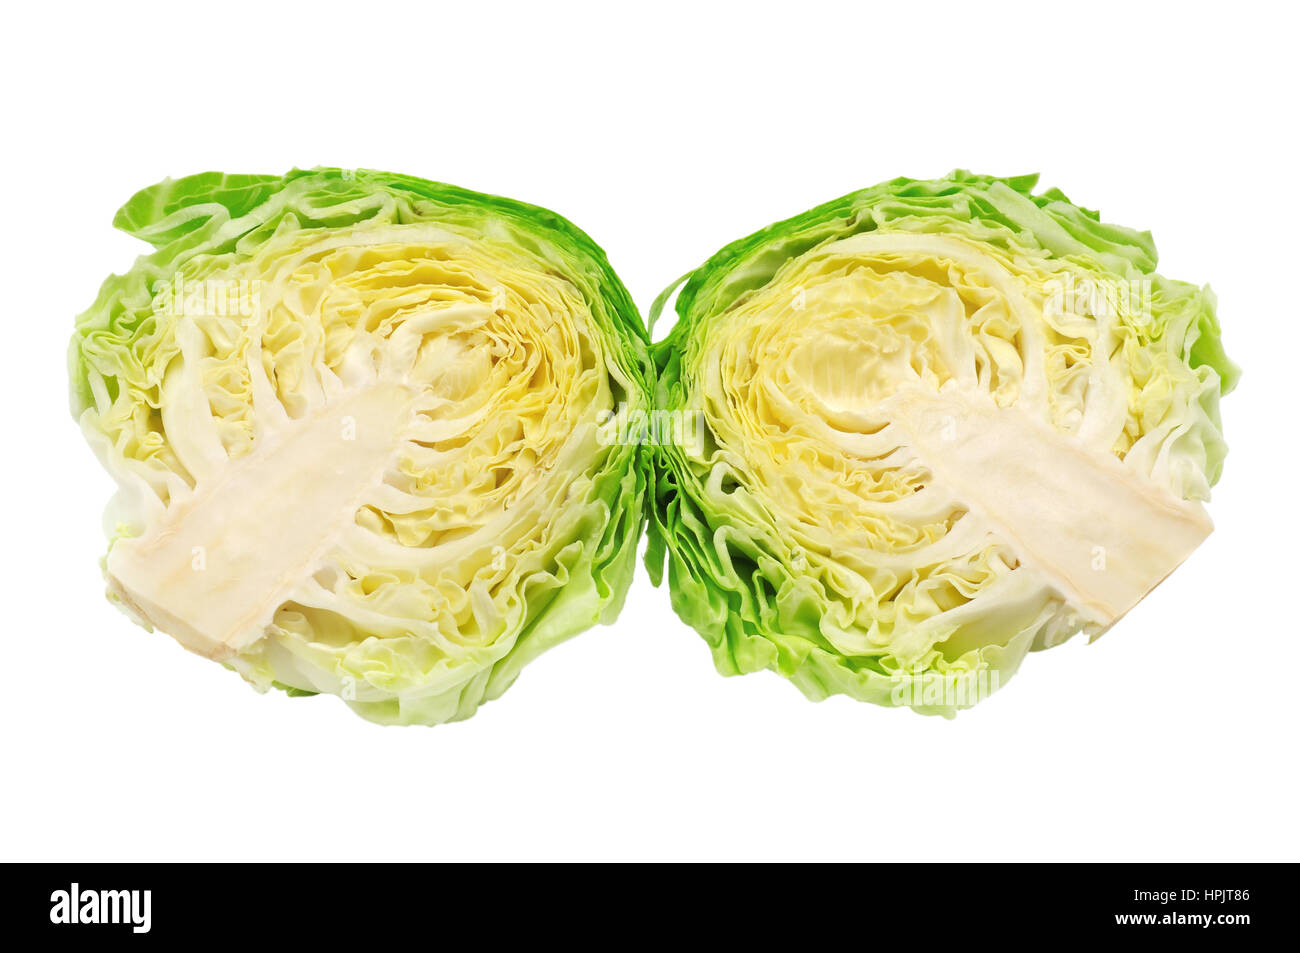 Cutting head cabbage isolated on a white background Stock Photo